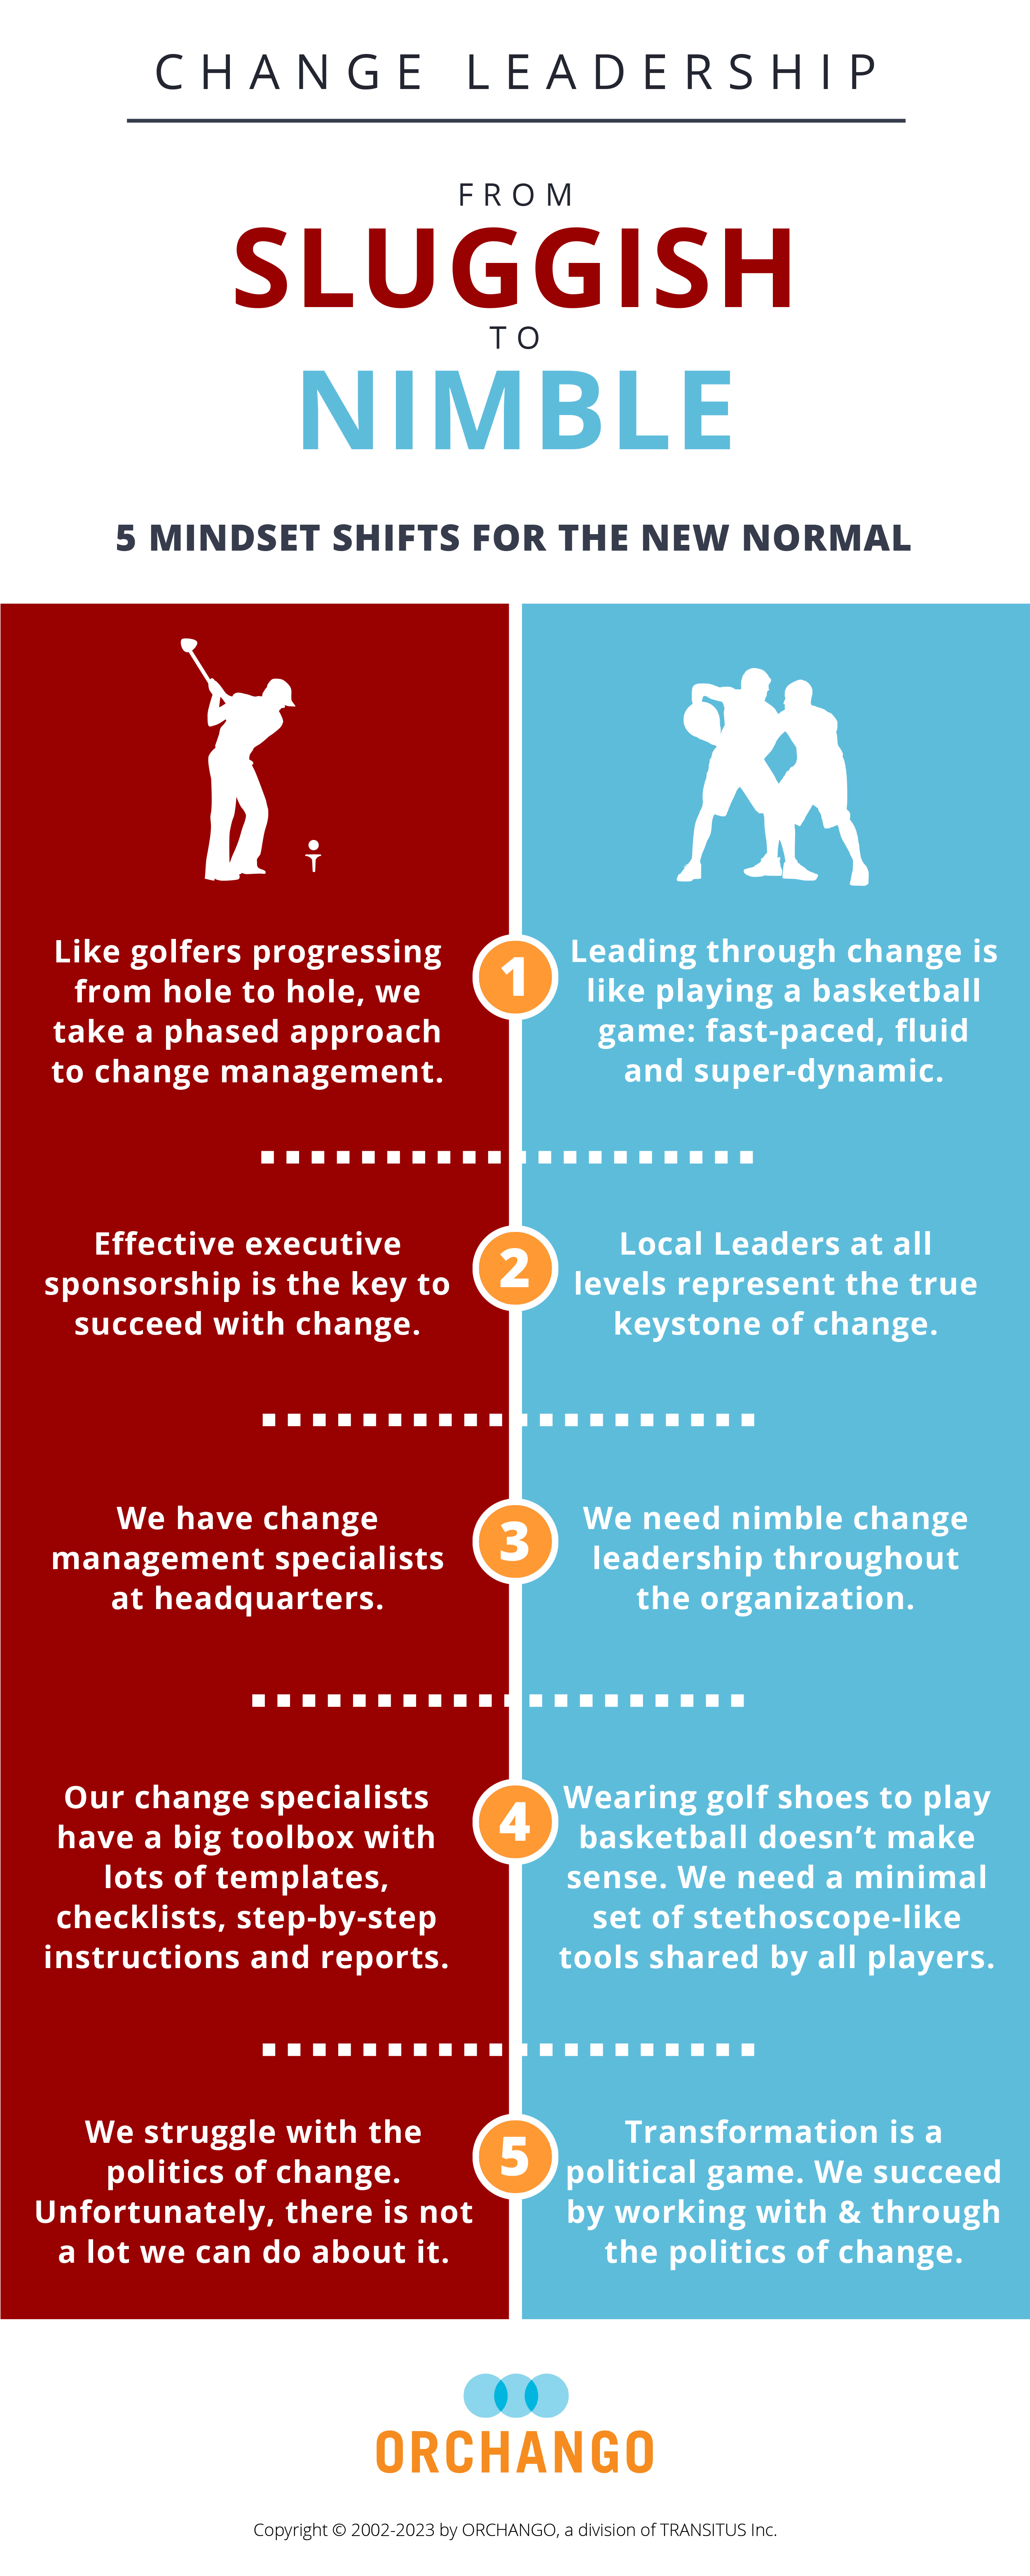 Change Leadership – From Sluggish to Nimble: 5 Mindset Shifts for the New Normal Infographic by ORCHANGO